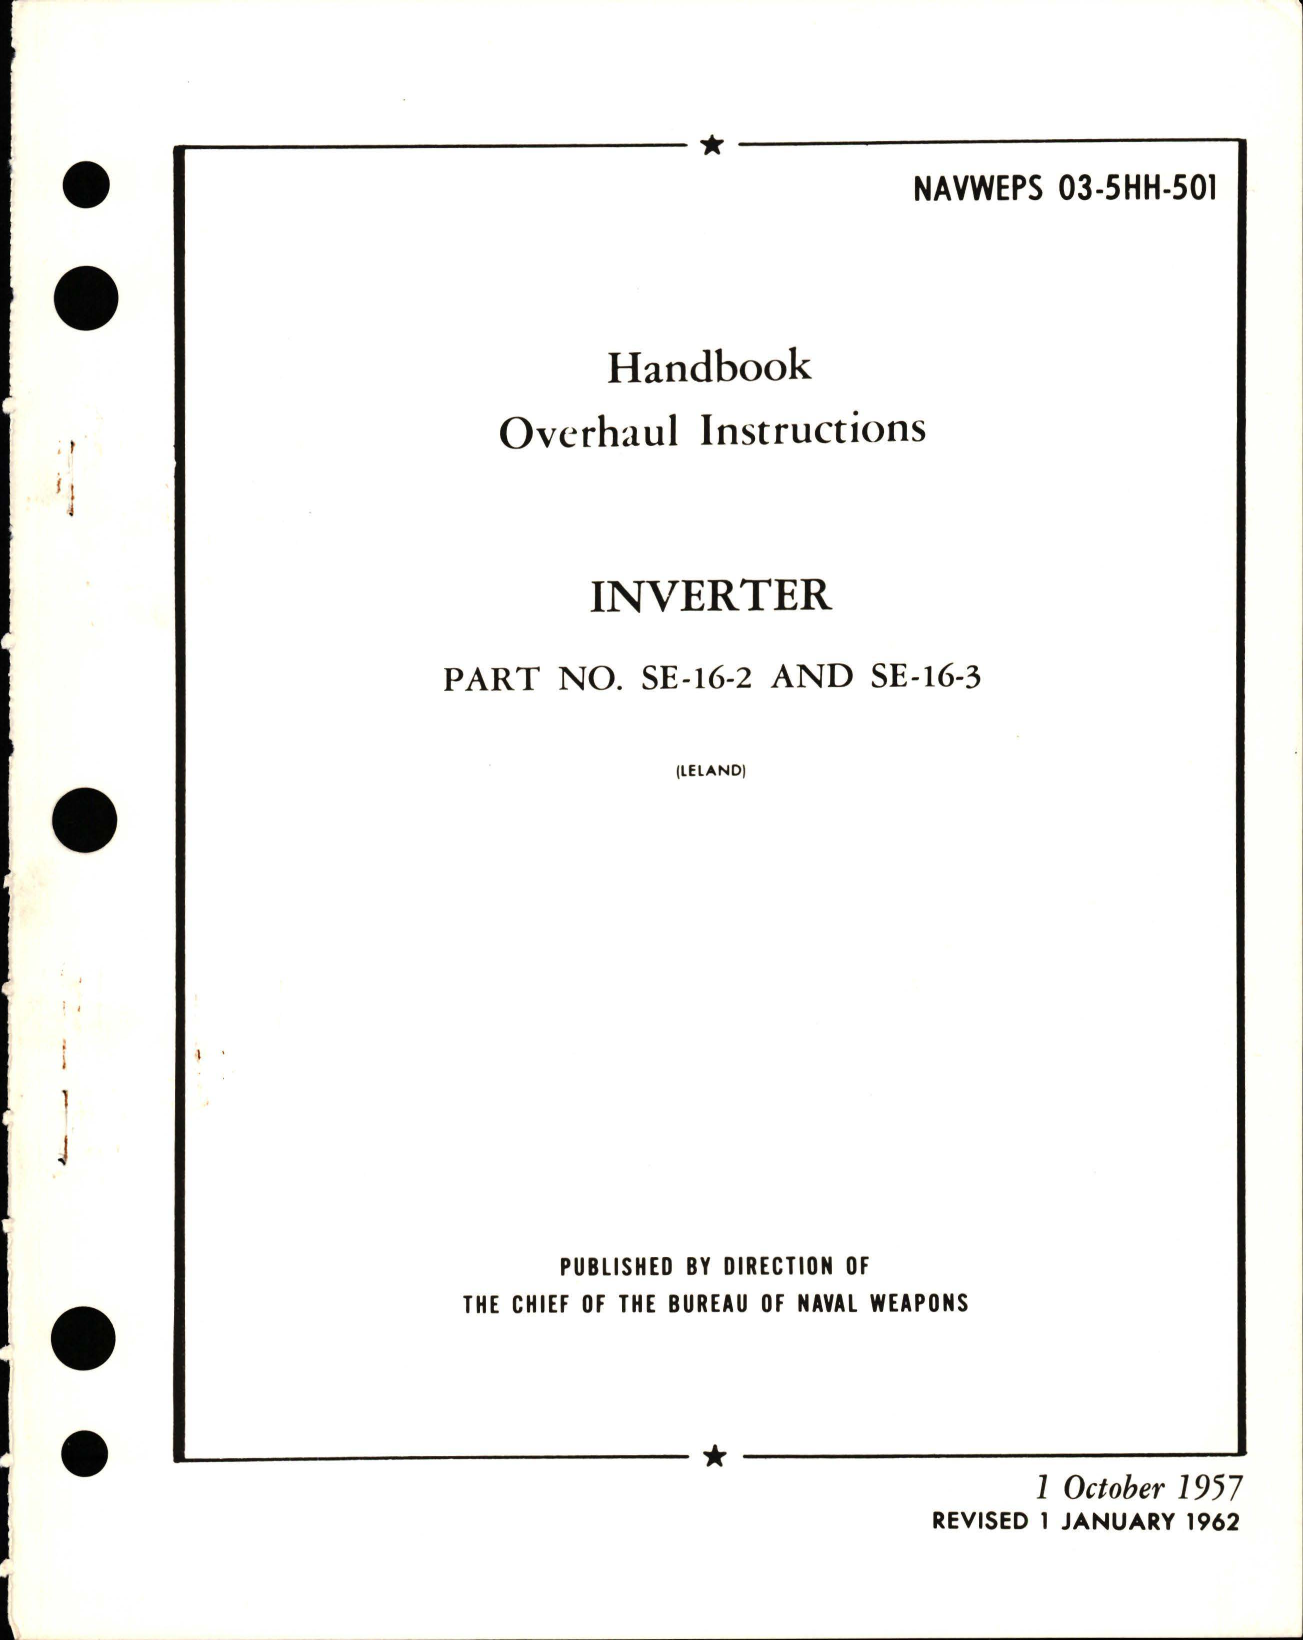 Sample page 1 from AirCorps Library document: Overhaul Instructions for Inverter - Part SE-16-2 and SE-16-3